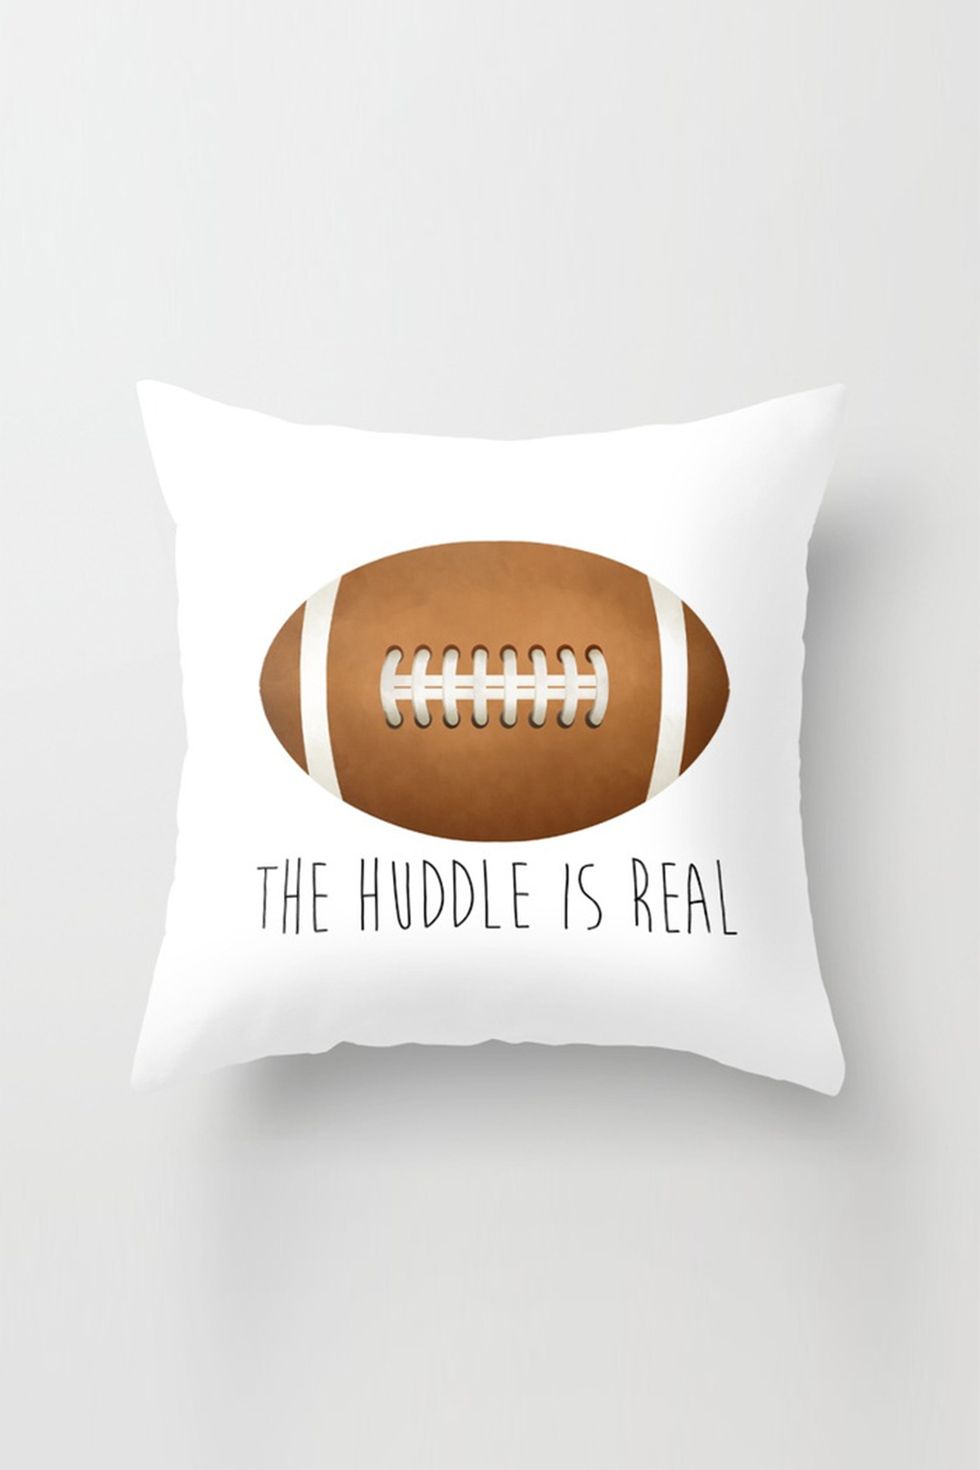 The Huddle Is Real Throw Pillow Cover